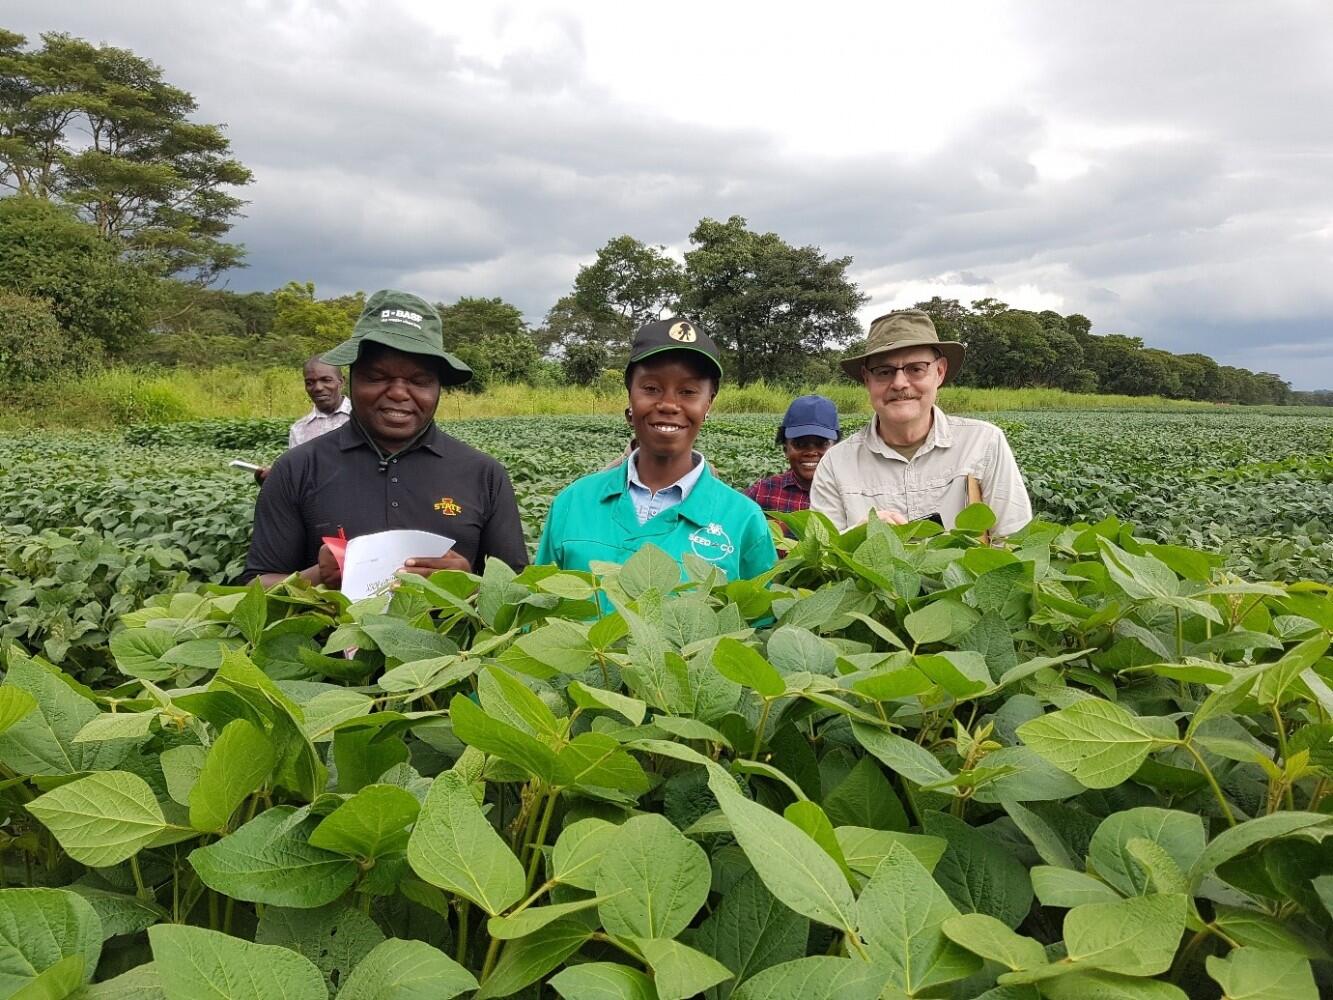 Developing red leaf blotch resistant soybeans through research in Africa